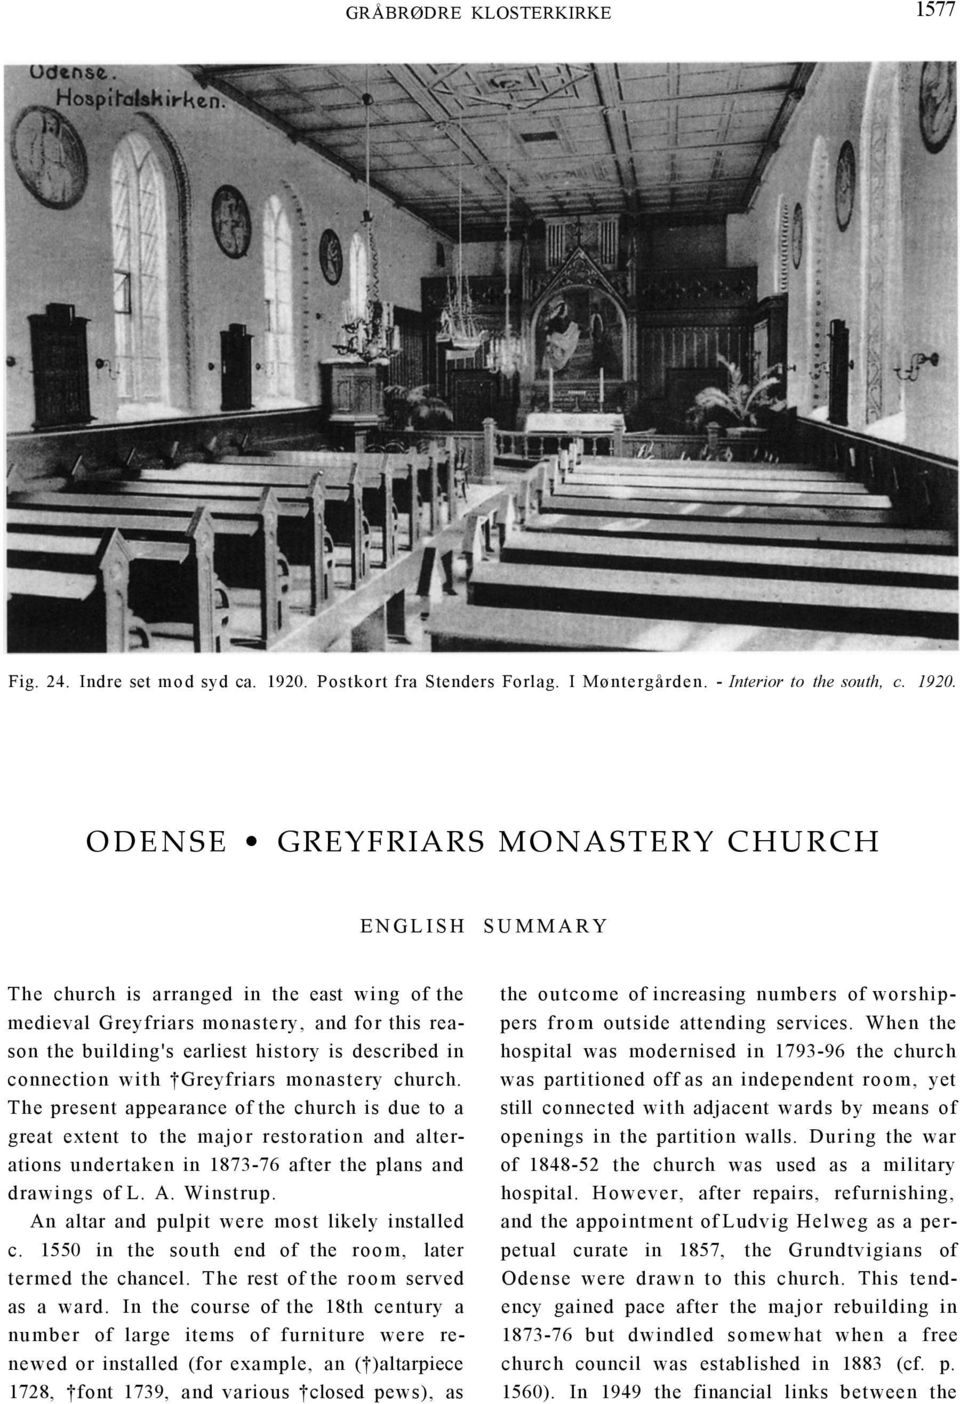 ODENSE GREYFRIARS MONASTERY CHURCH ENGLISH SUMMARY The church is arranged in the east wing of the medieval Greyfriars monastery, and for this reason the building's earliest history is described in